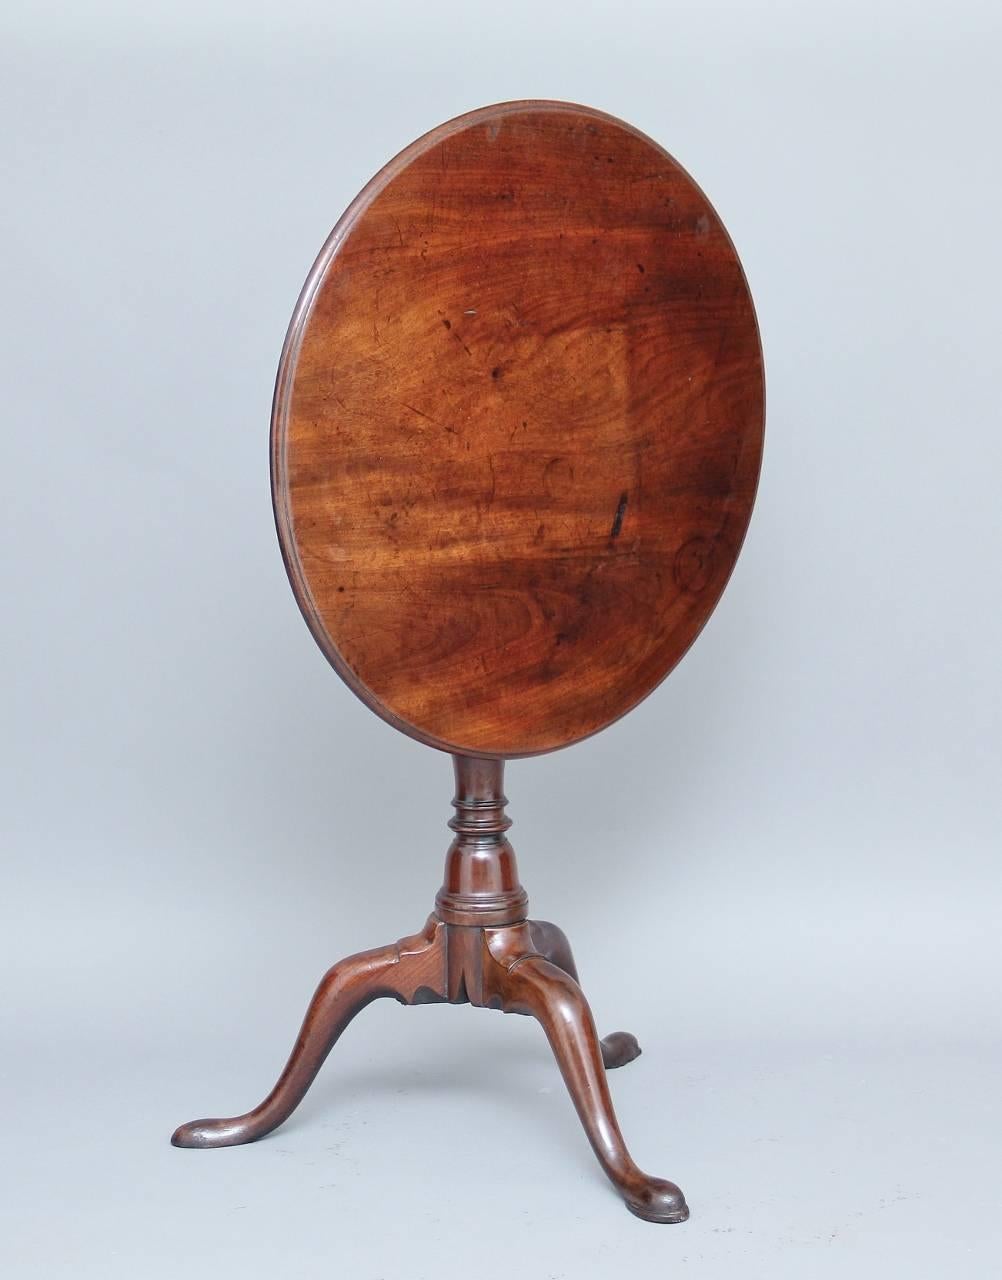 A lovely quality 18th century mahogany tripod table with a solid mahogany top with a moulded edge, with a birdcage mount below sitting on a lovely shaped turned column terminating with three shaped slender legs, circa 1770.

Measures: Height